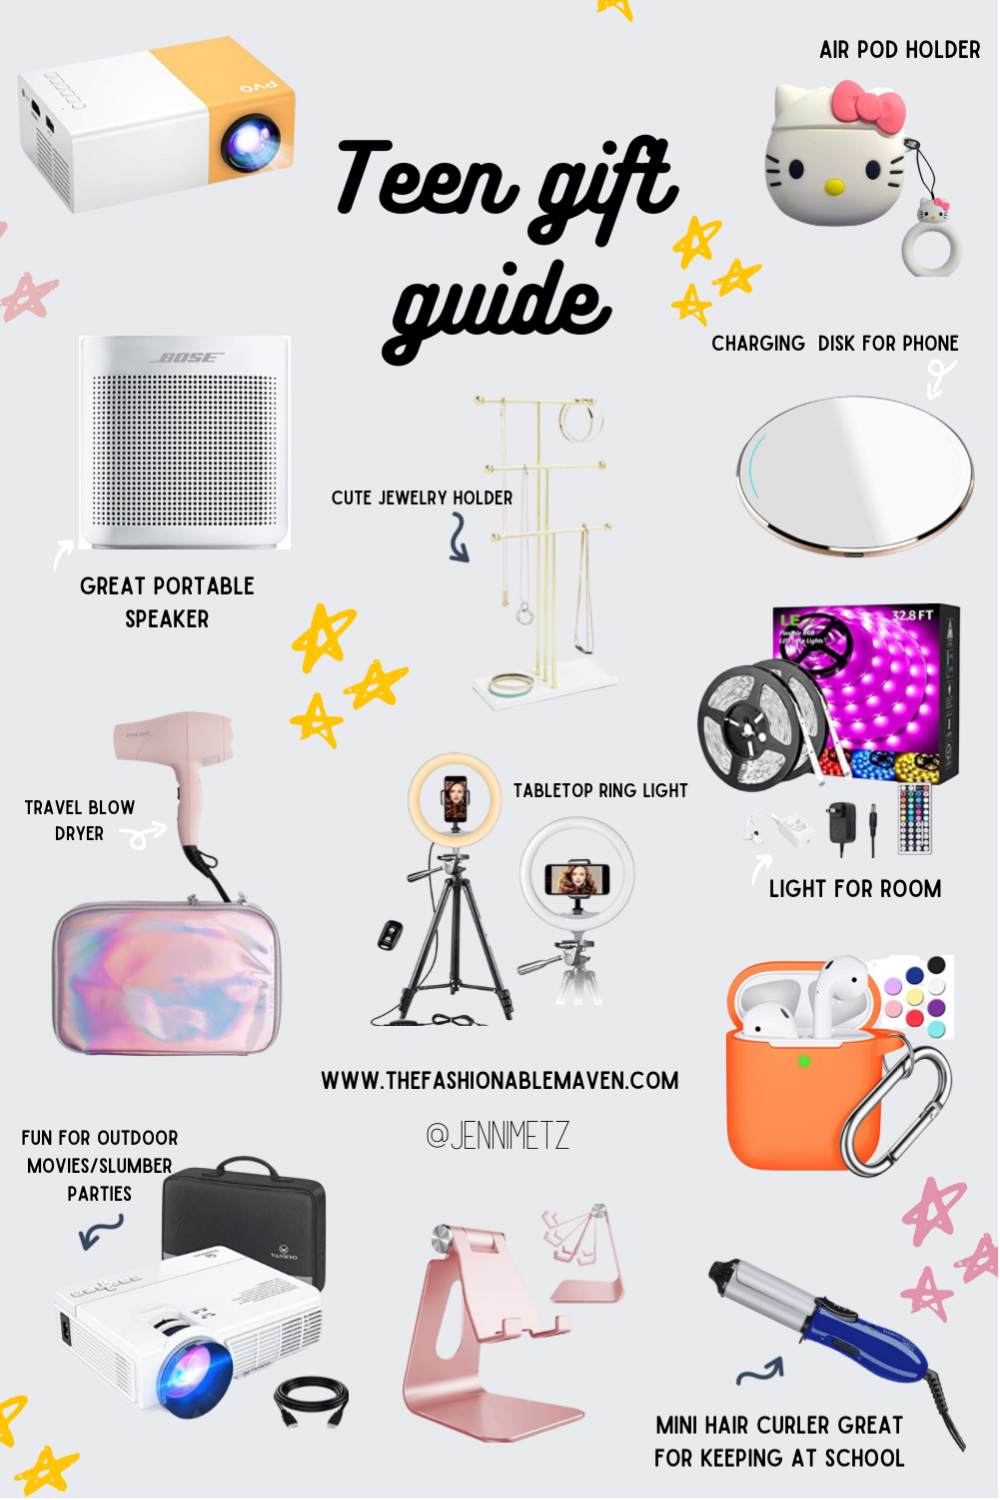 Teen gift guide ideas Items they will love and use. The Fashionable